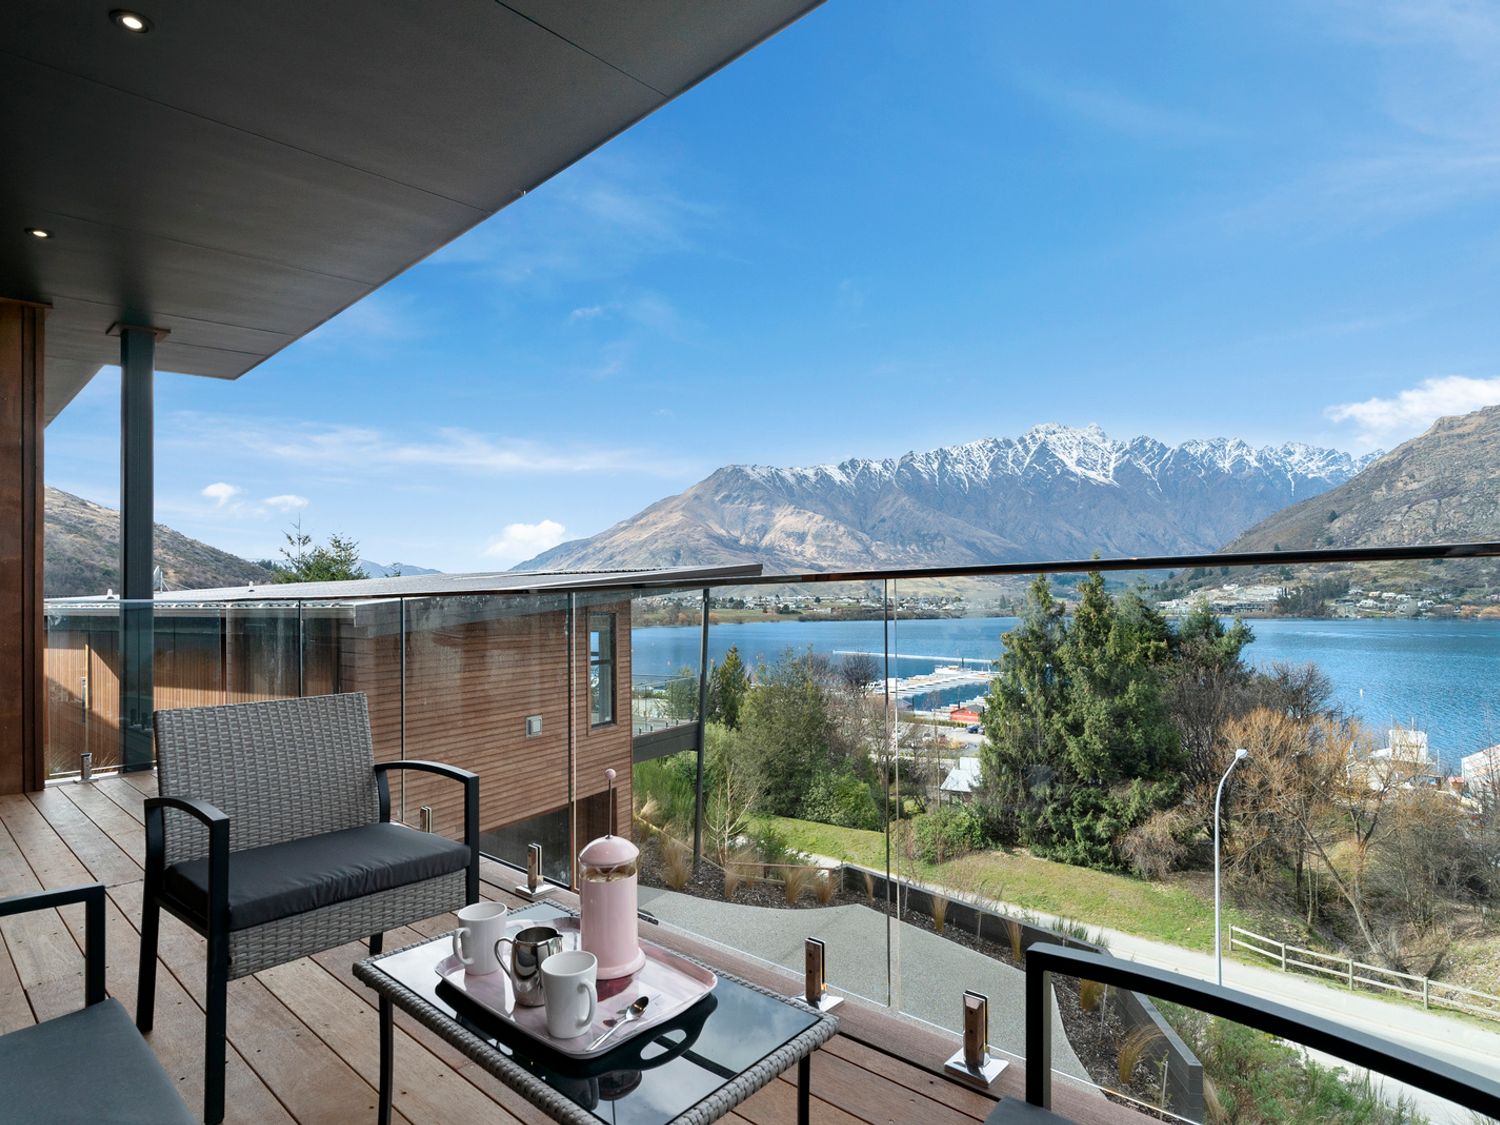 Lakeside Bliss - Queenstown Holiday Home -  - 1083761 - photo 1